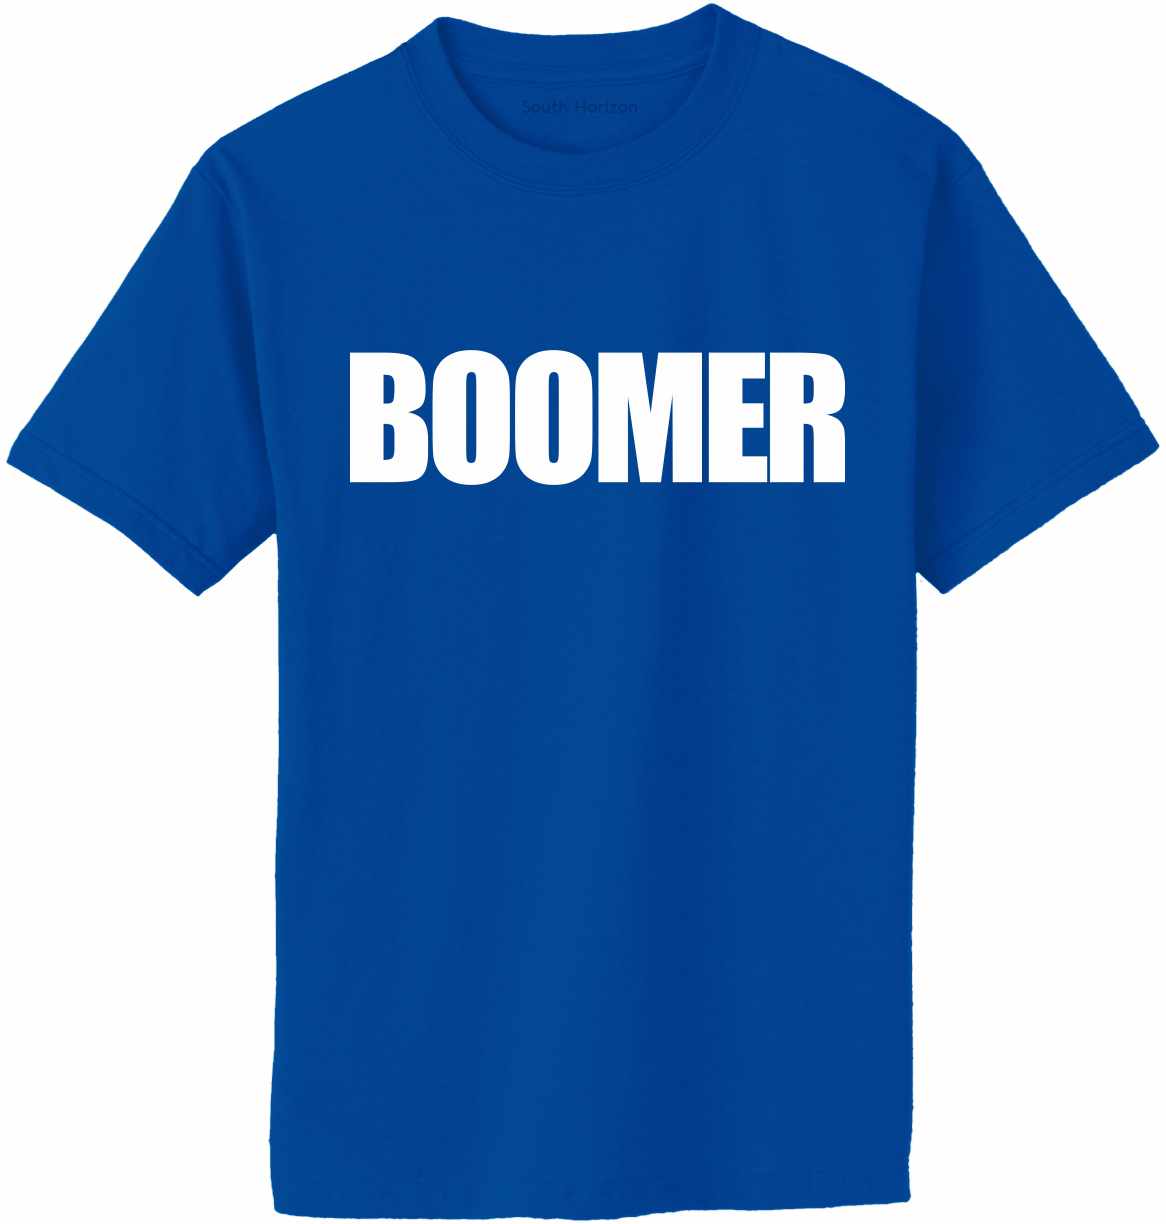 BOOMER on Adult T-Shirt